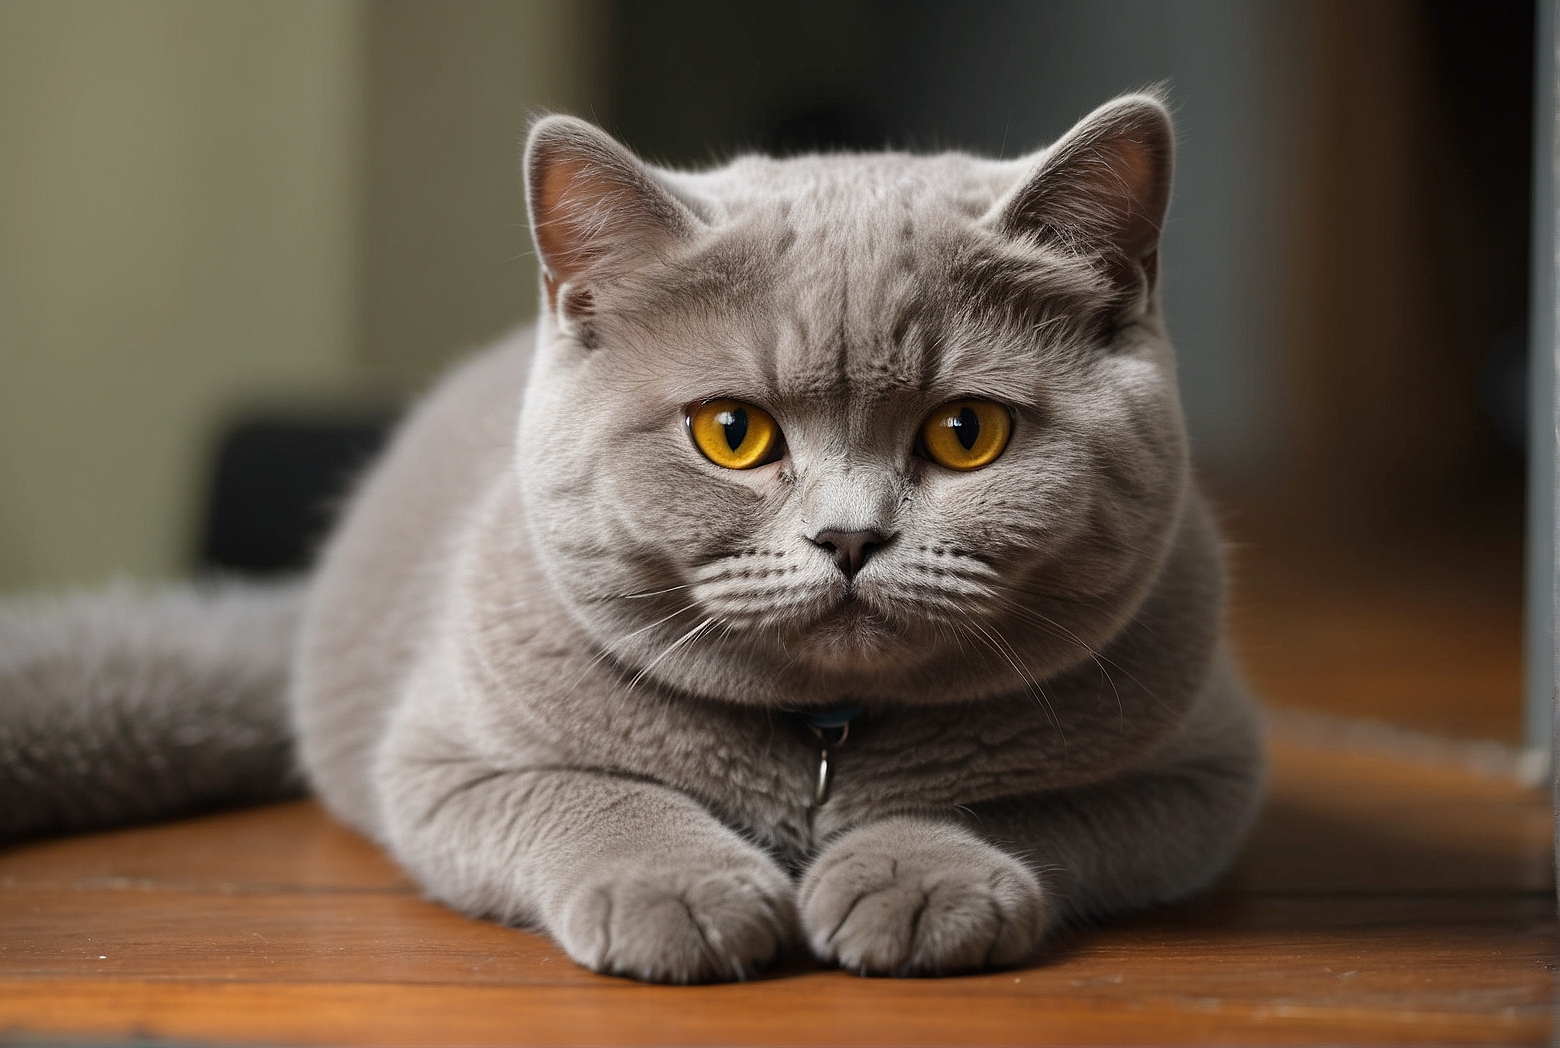 What Do British Shorthair Cats Look Like?